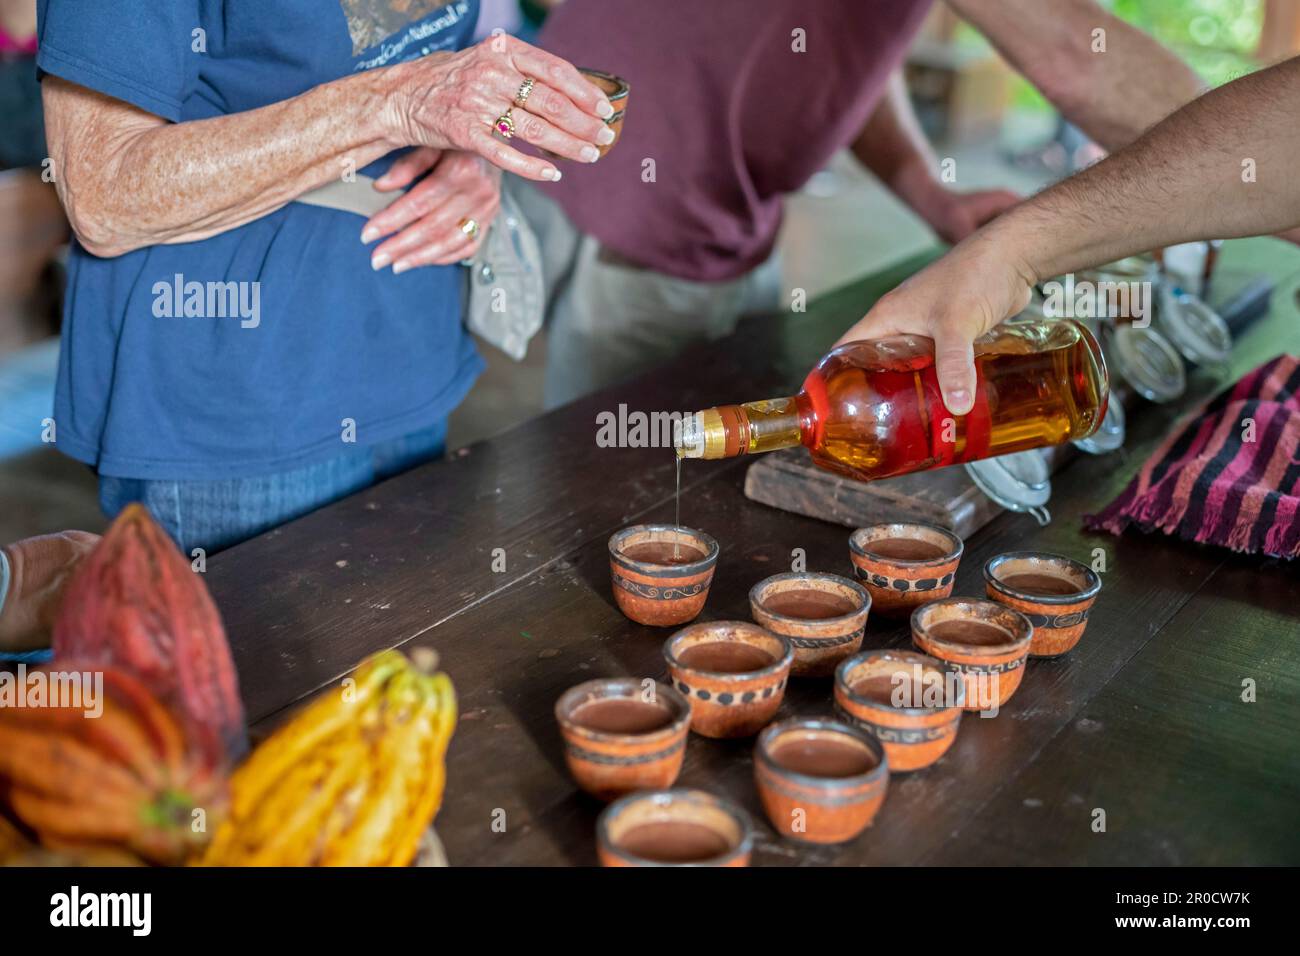 La Virgen, Costa Rica - Visitors to the Tirimbina research station learn about the cacao plant and how chocolate is made from cacao beans. Stock Photo